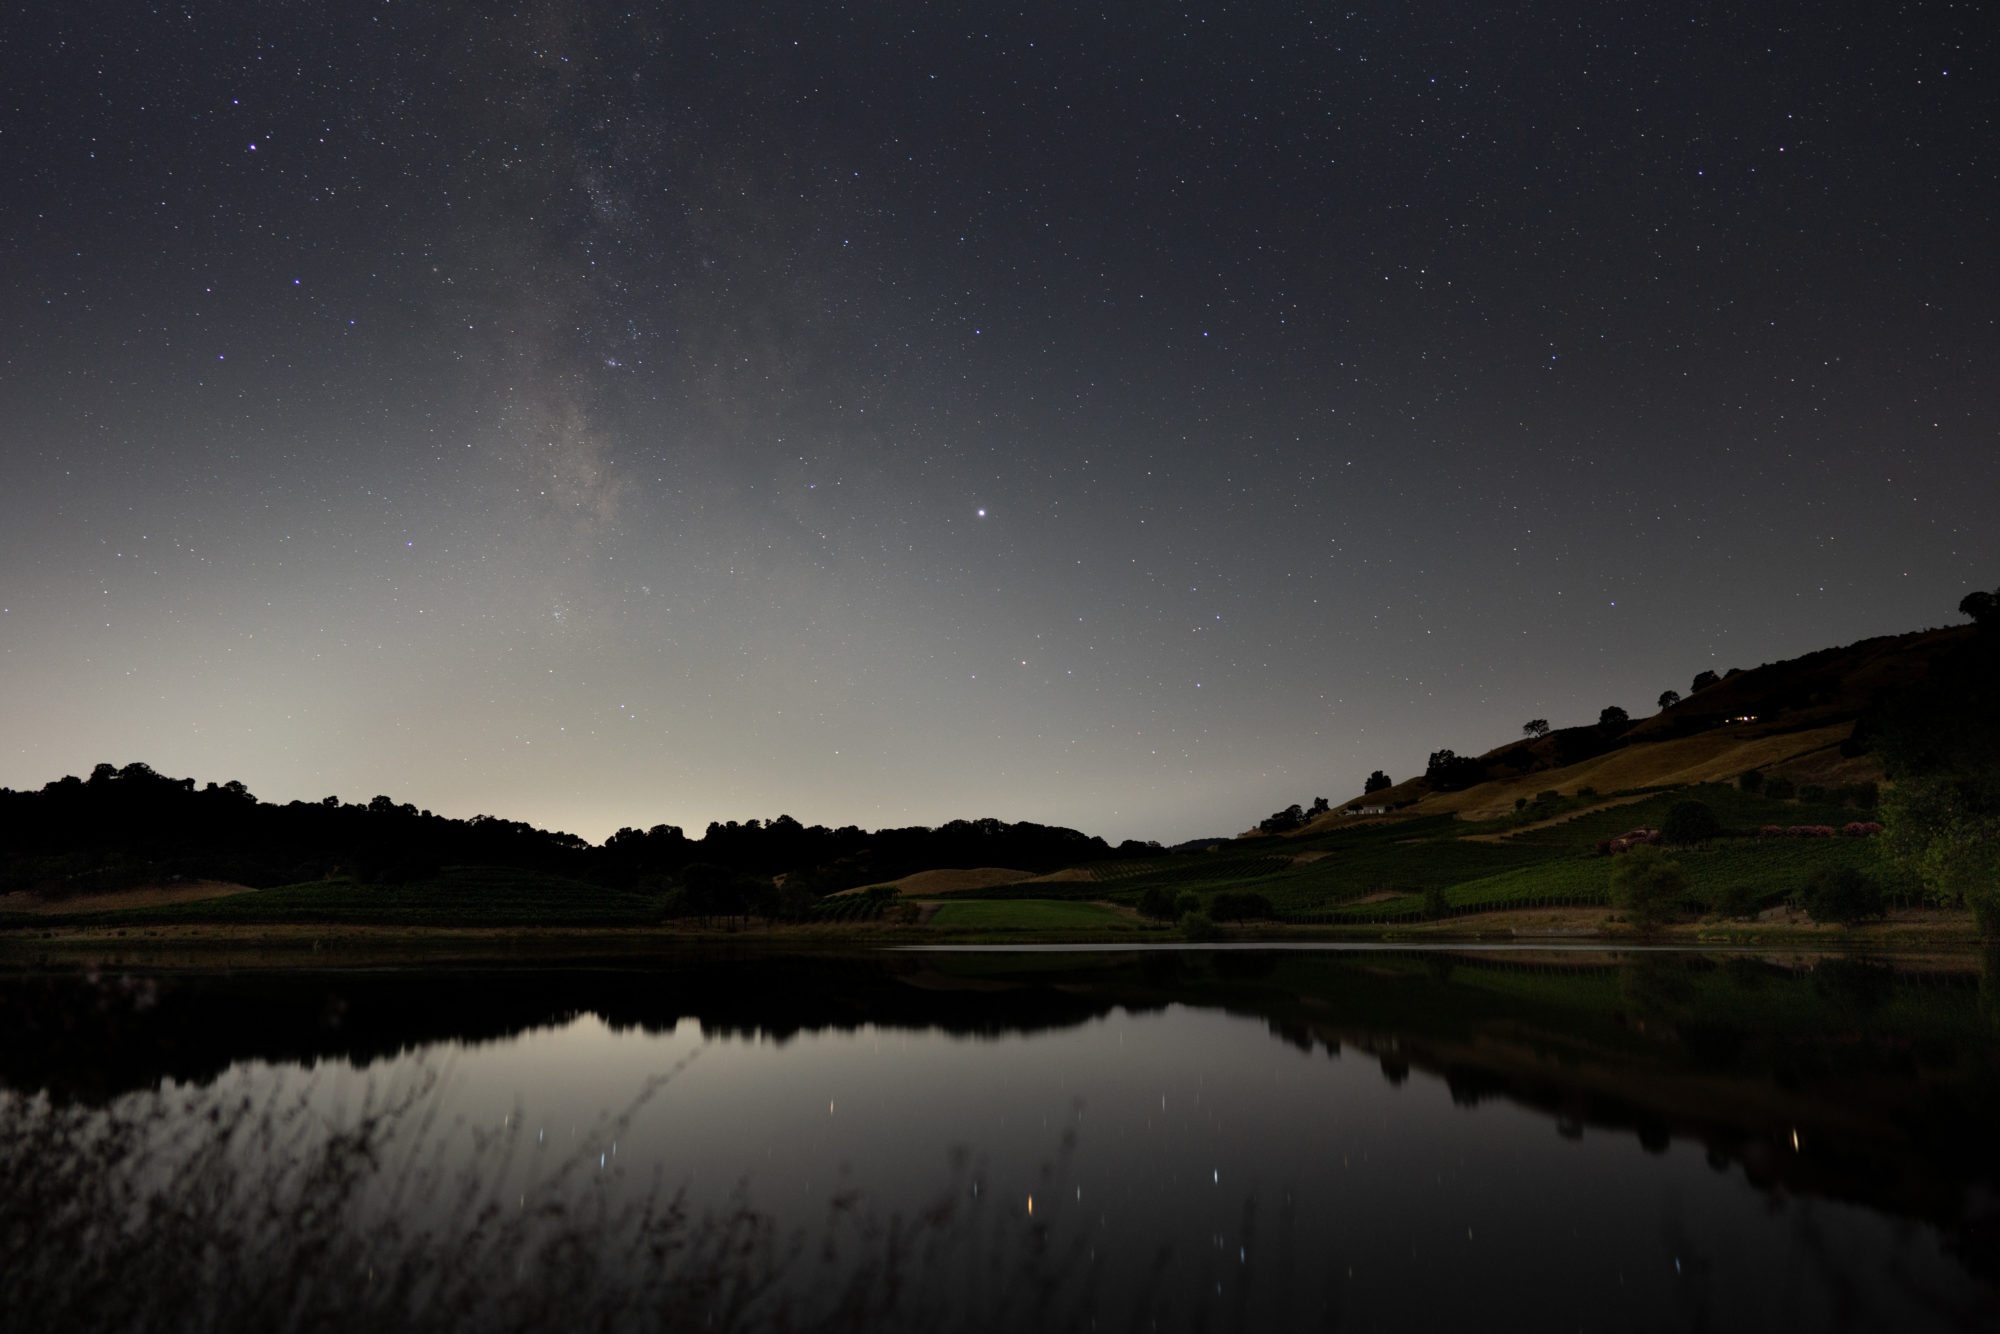 The heaven's above reflecting stars onto the pond at night, in the vineyard.